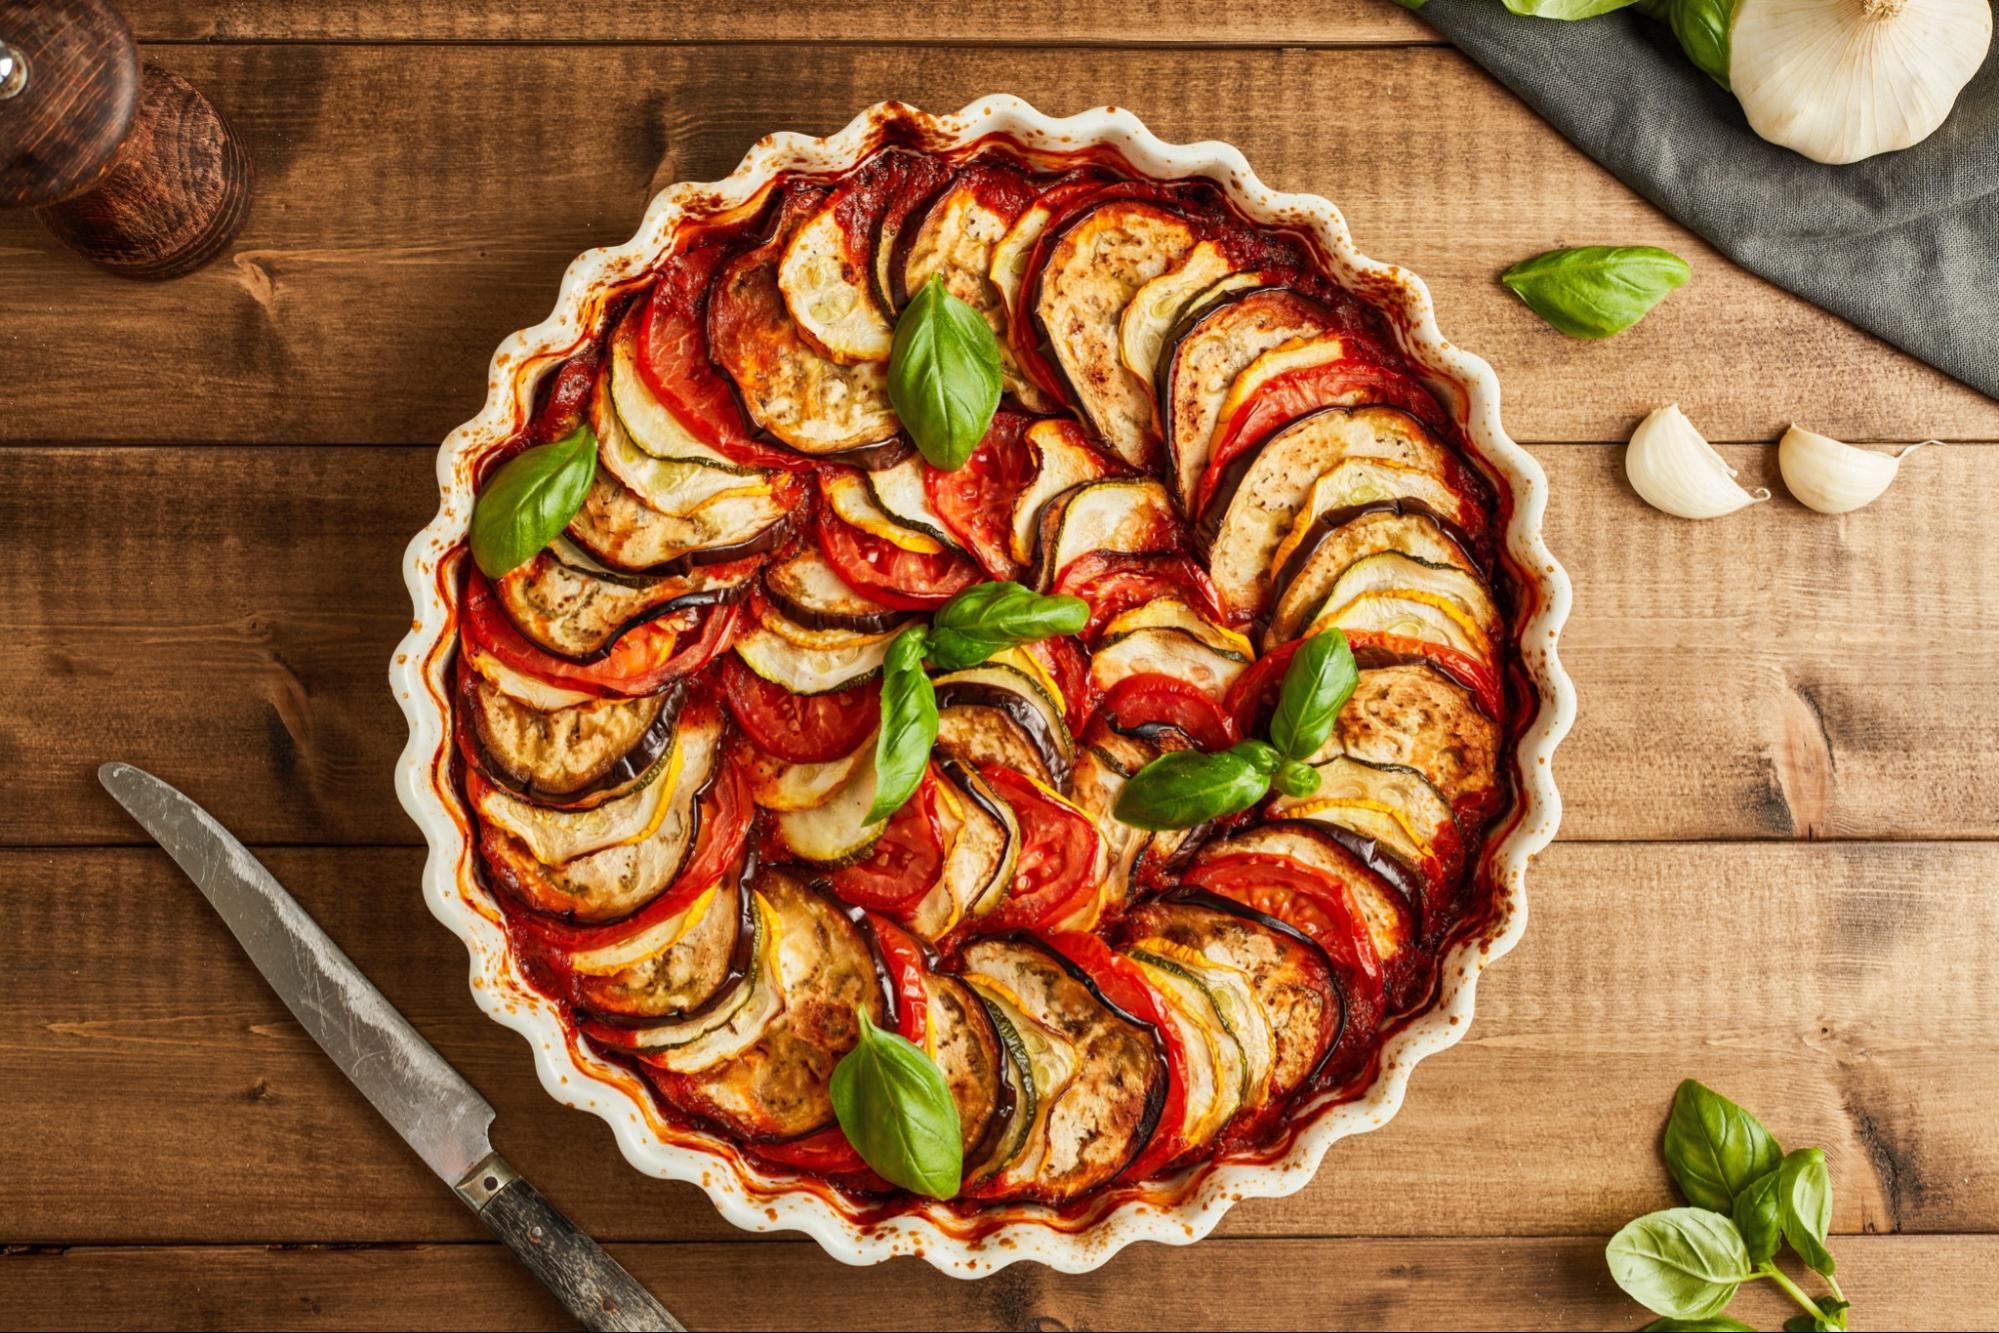 Tian Provencal (French Baked Summer Vegetables)